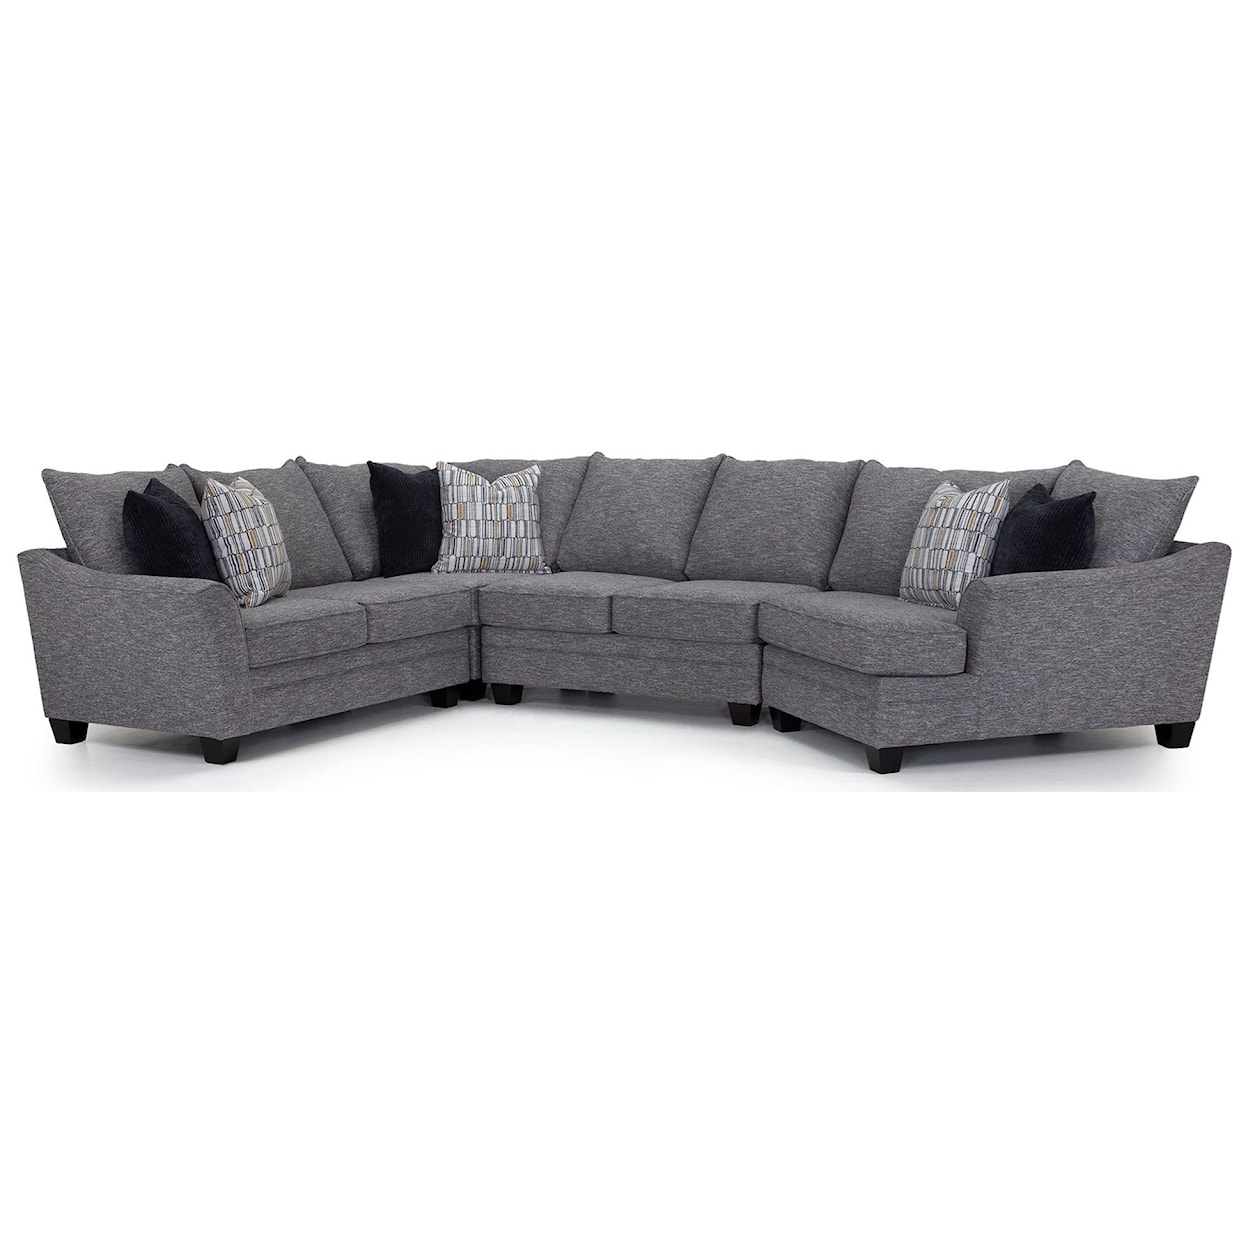 Franklin 983 Sectional